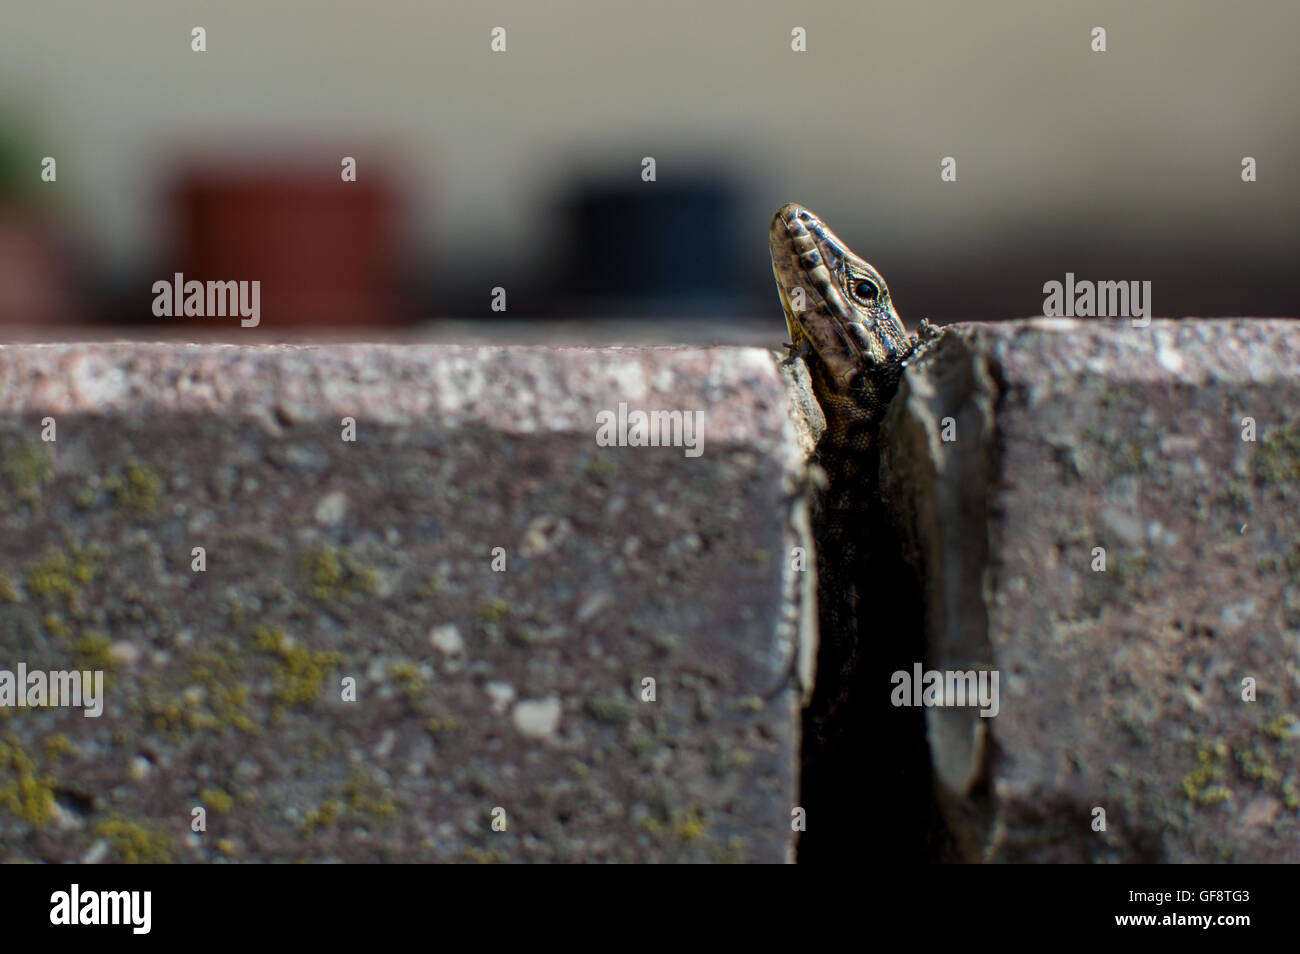 Lizard emerging from a crack in the pavement Stock Photo